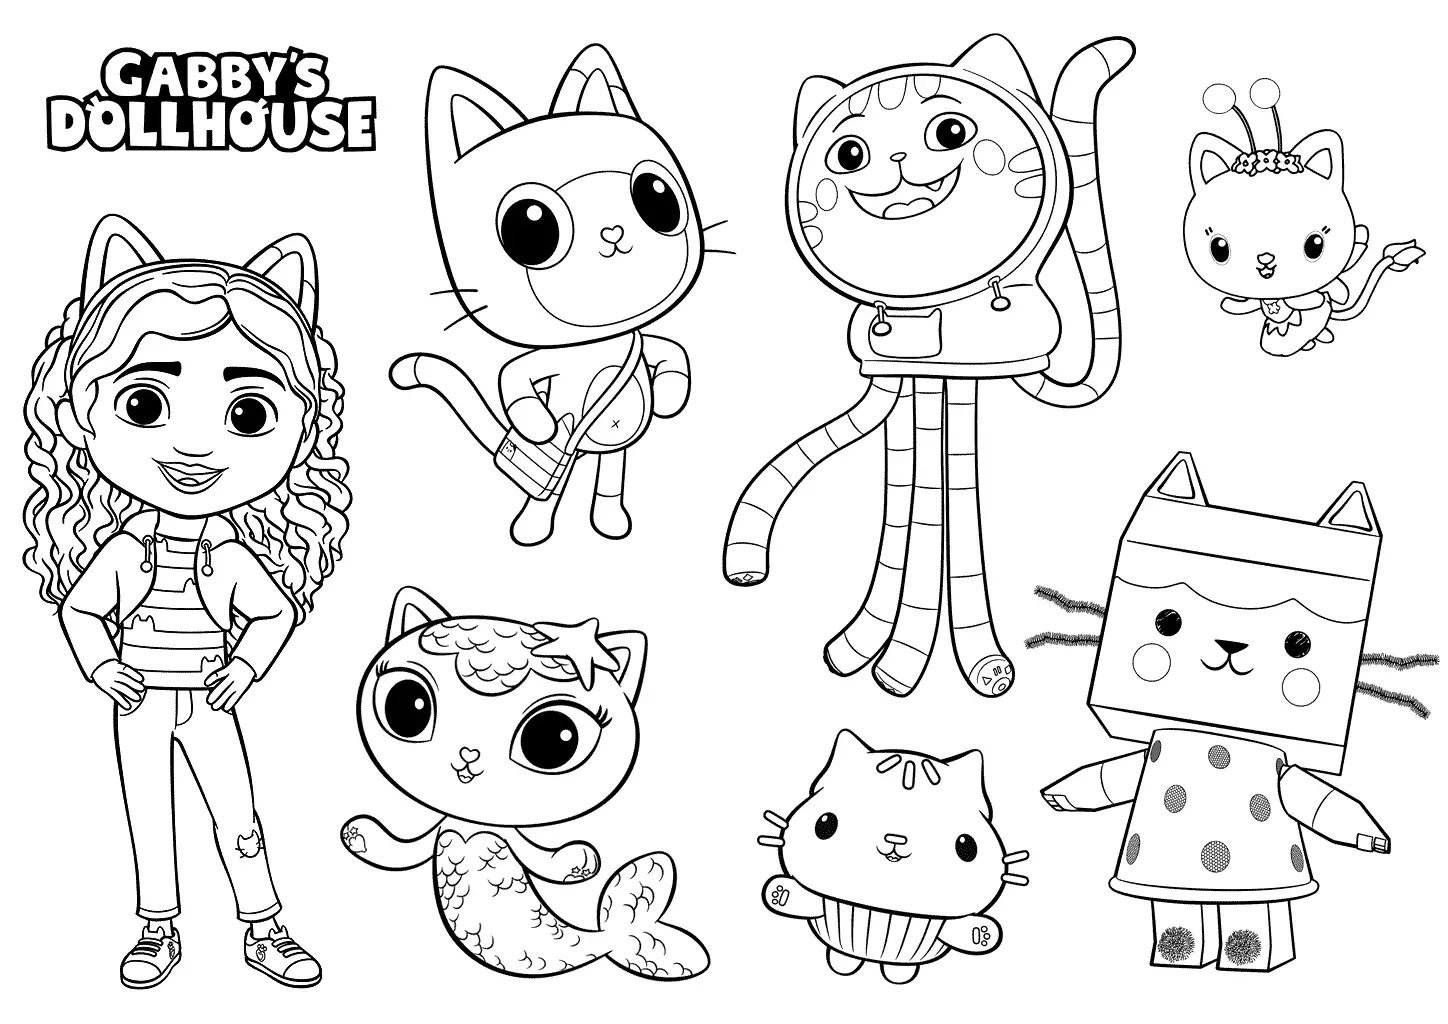 Gabbys Dollhouse Characters Coloring Pages